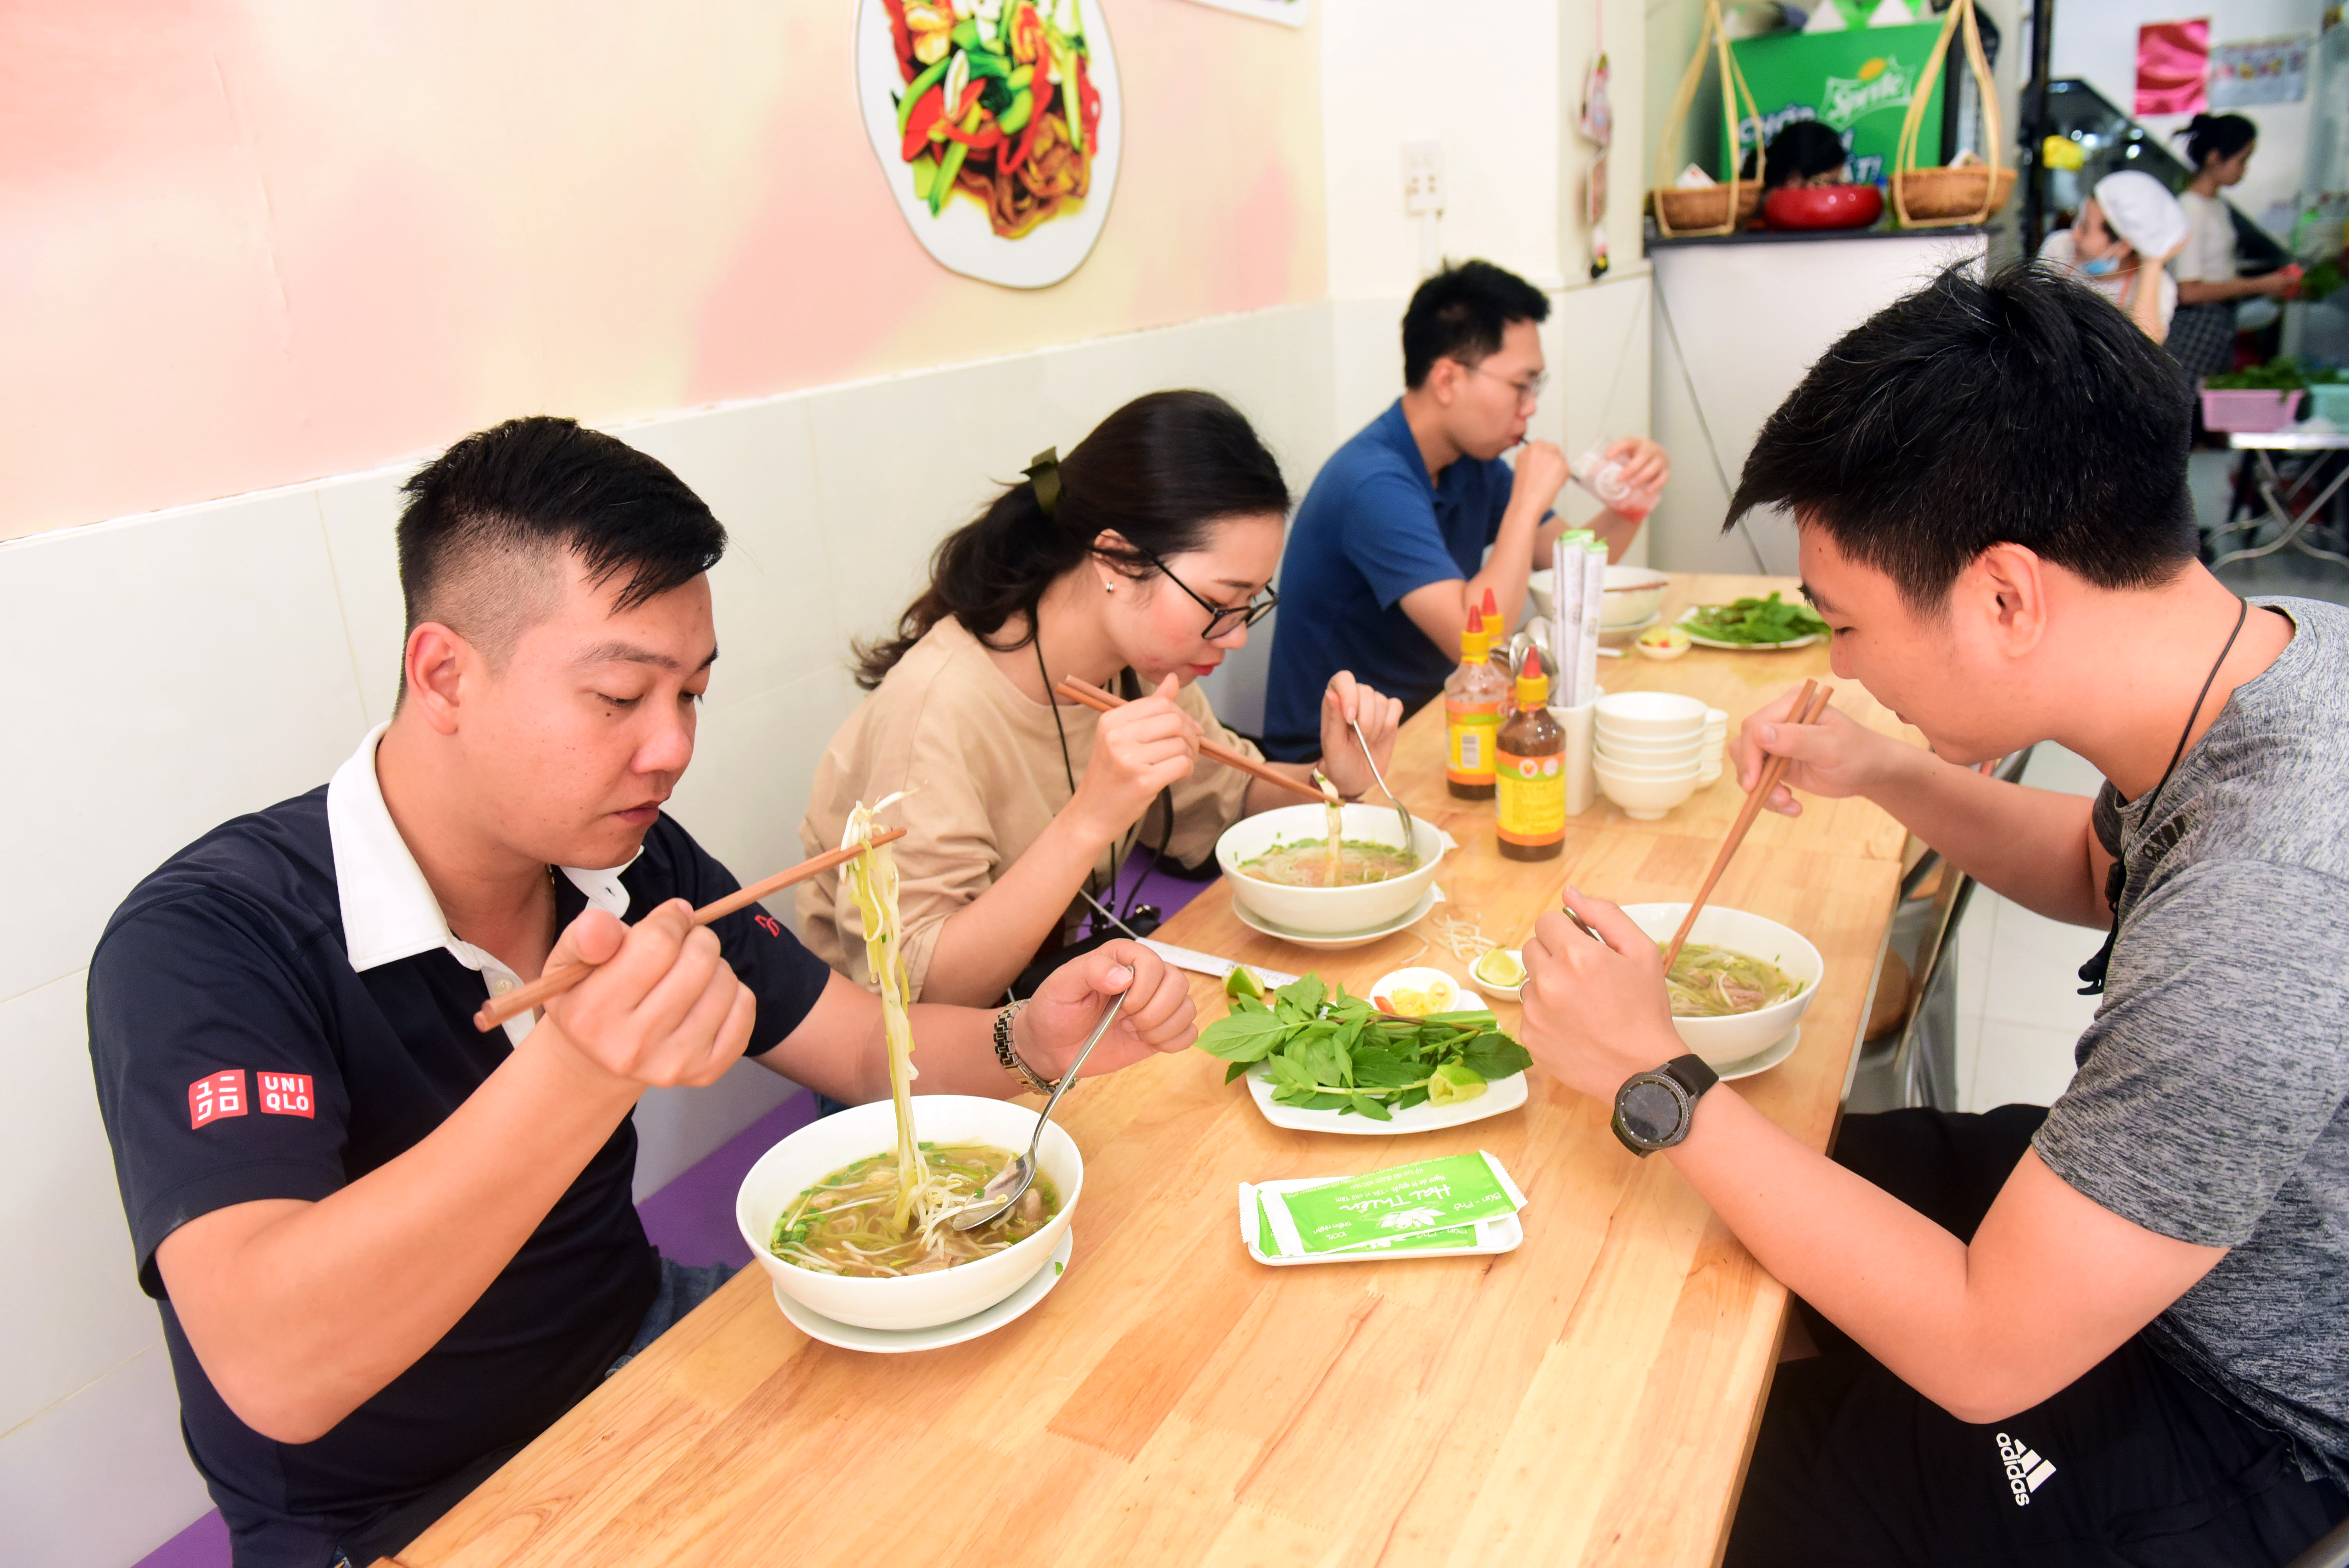 Dinners enjoy pho at Hai Thien restaurant in Ho Chi Minh City’s District 1. Photo: Duyen Phan/ Tuoi Tre